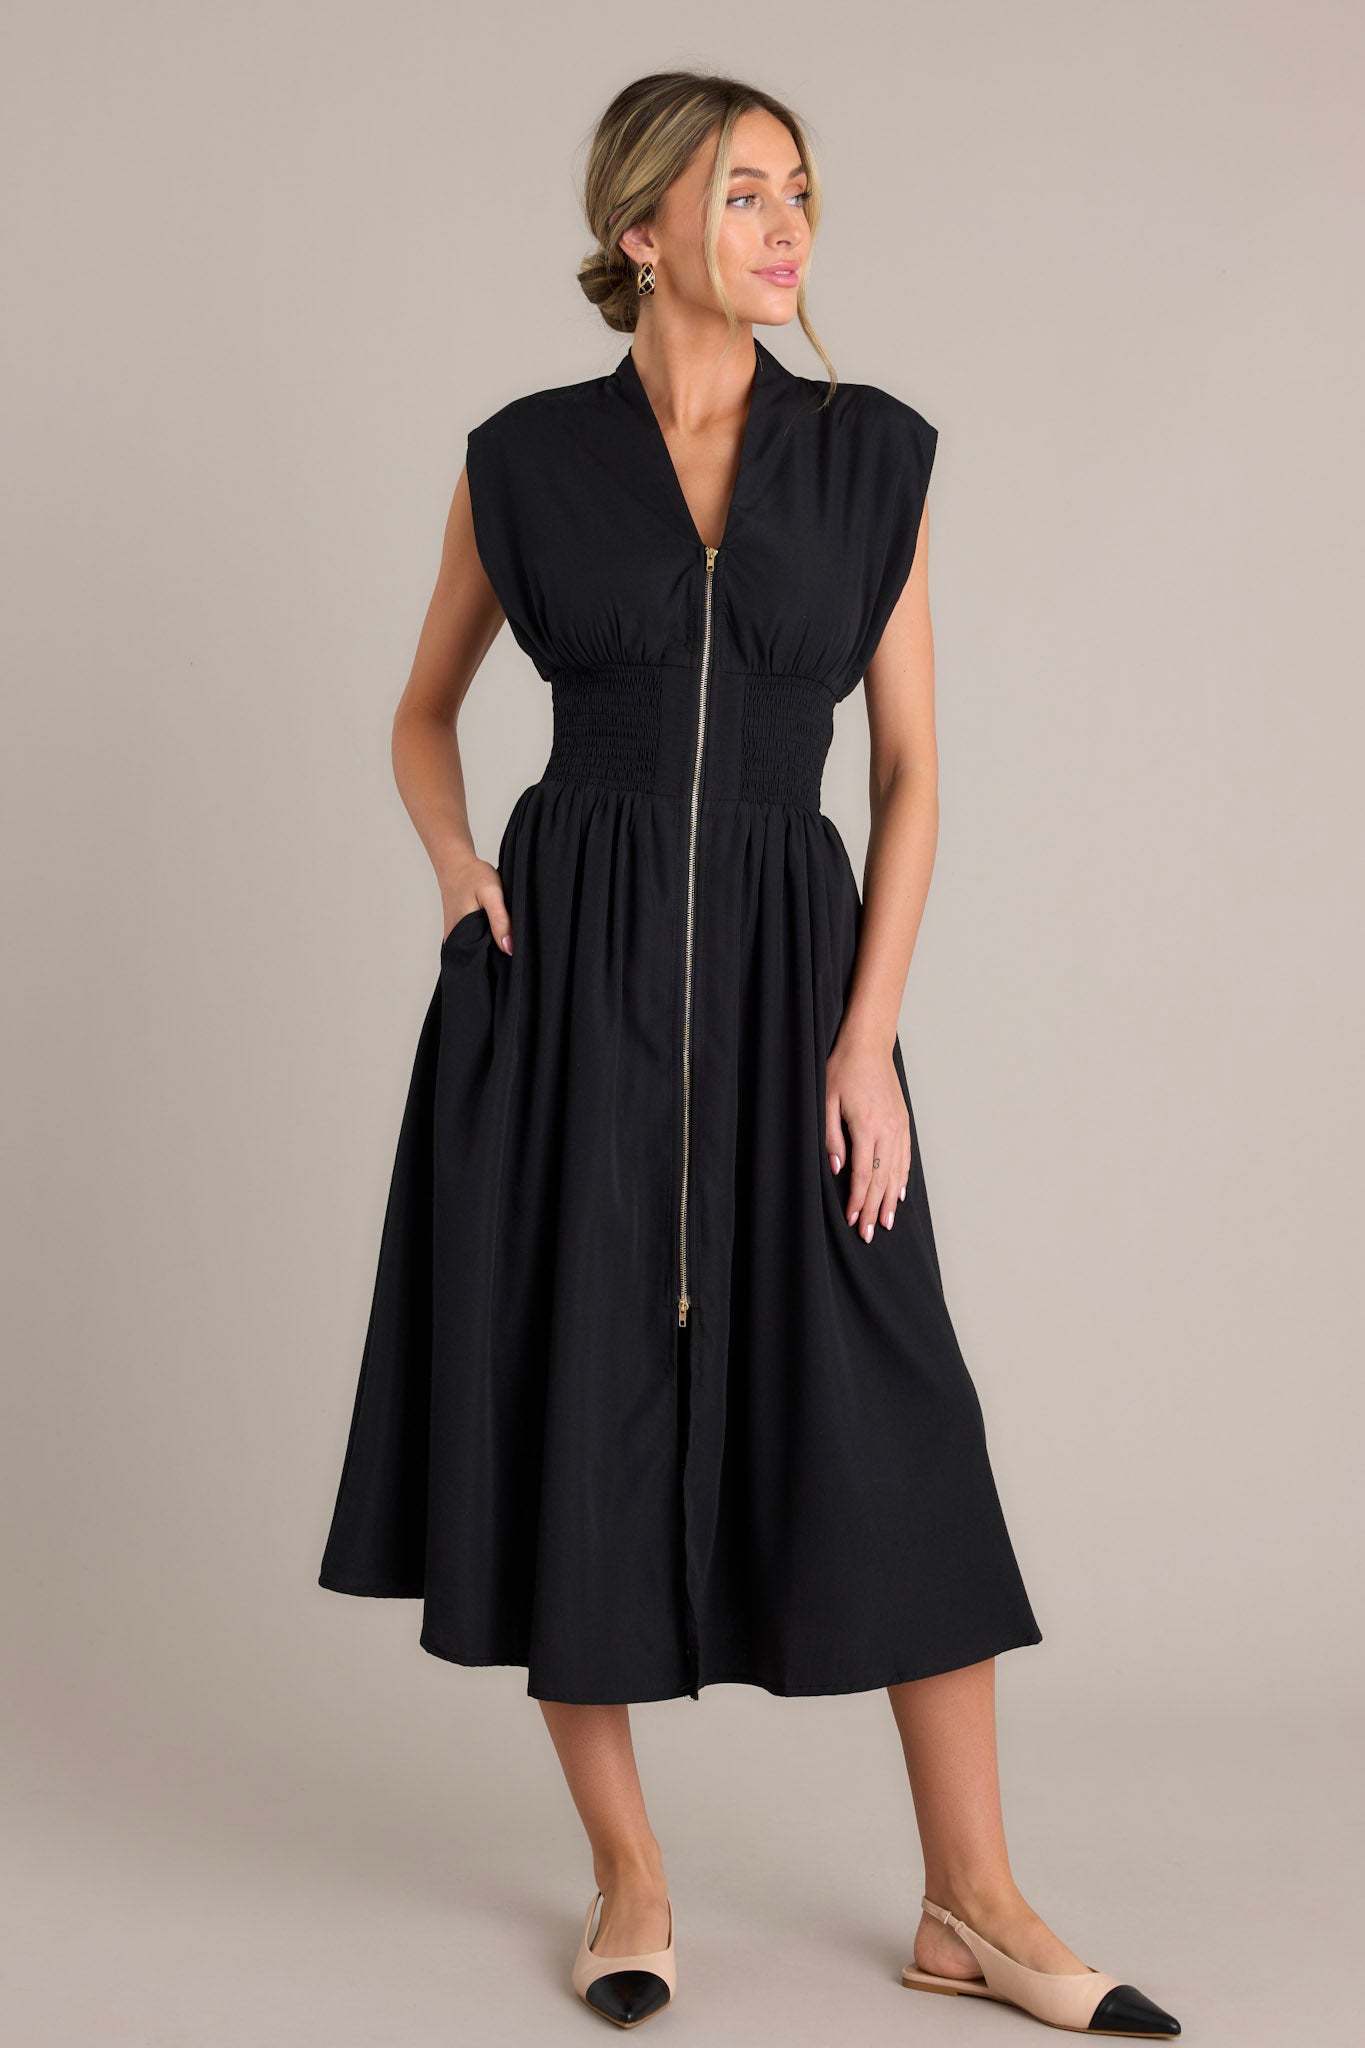 Full length view of a black midi dress with a v-neckline, padded shoulders, a full zipper front, a fully smocked waist, functional hip pockets, and a front slit